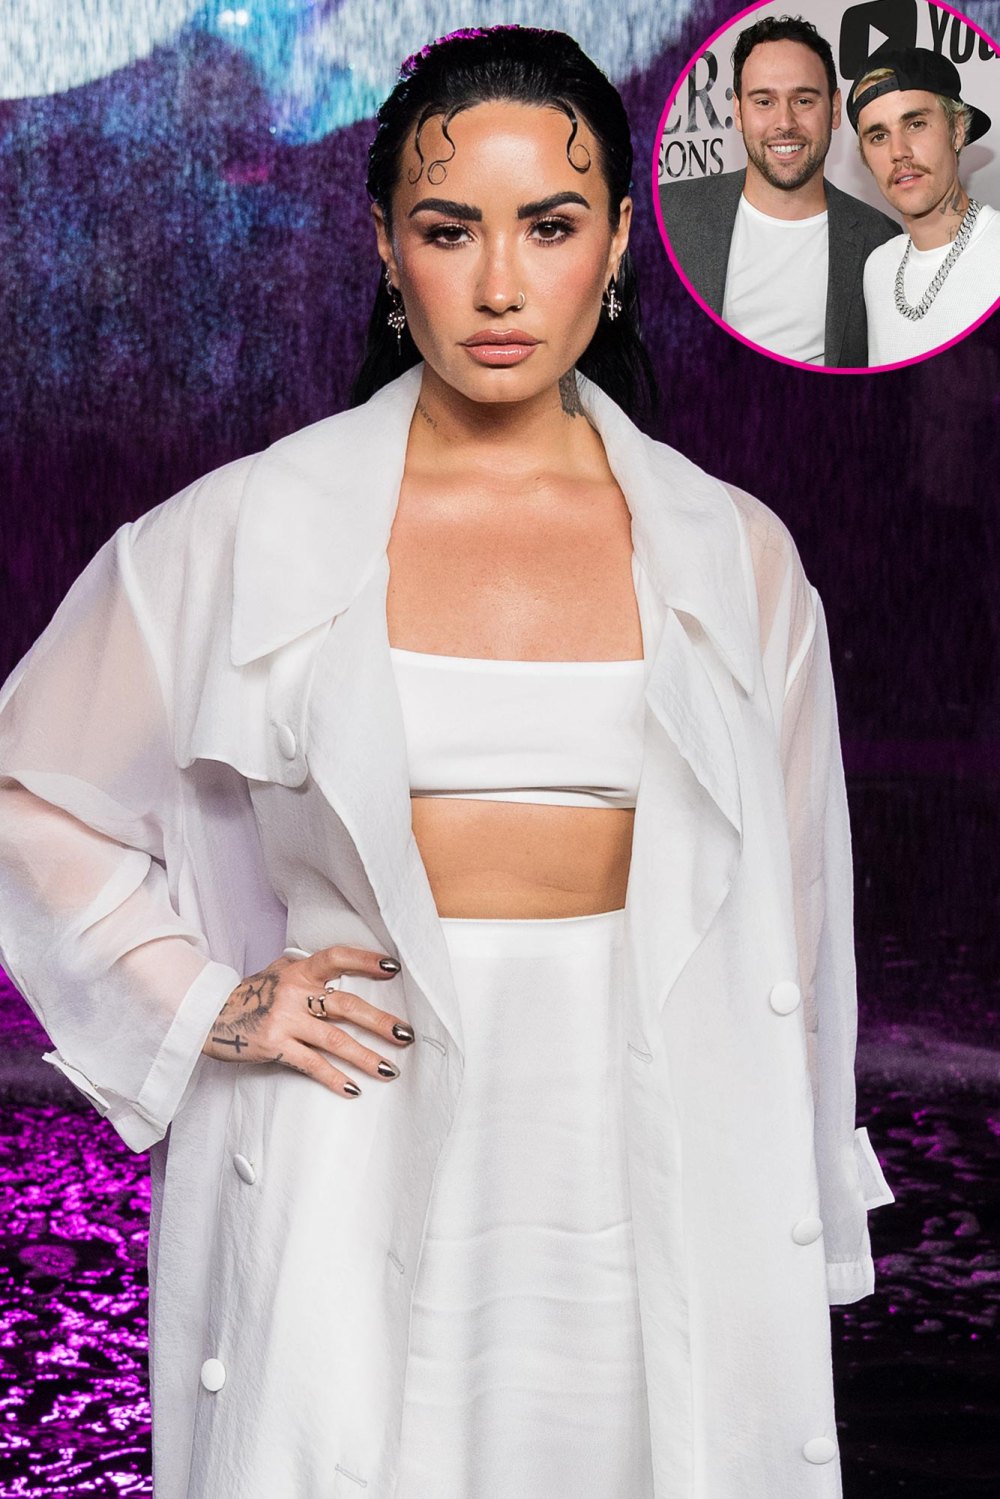 Demi Lovato Reportedly Parted Ways With Manager Scooter Braun Following Justin Bieber Split Rumors 258 Feature